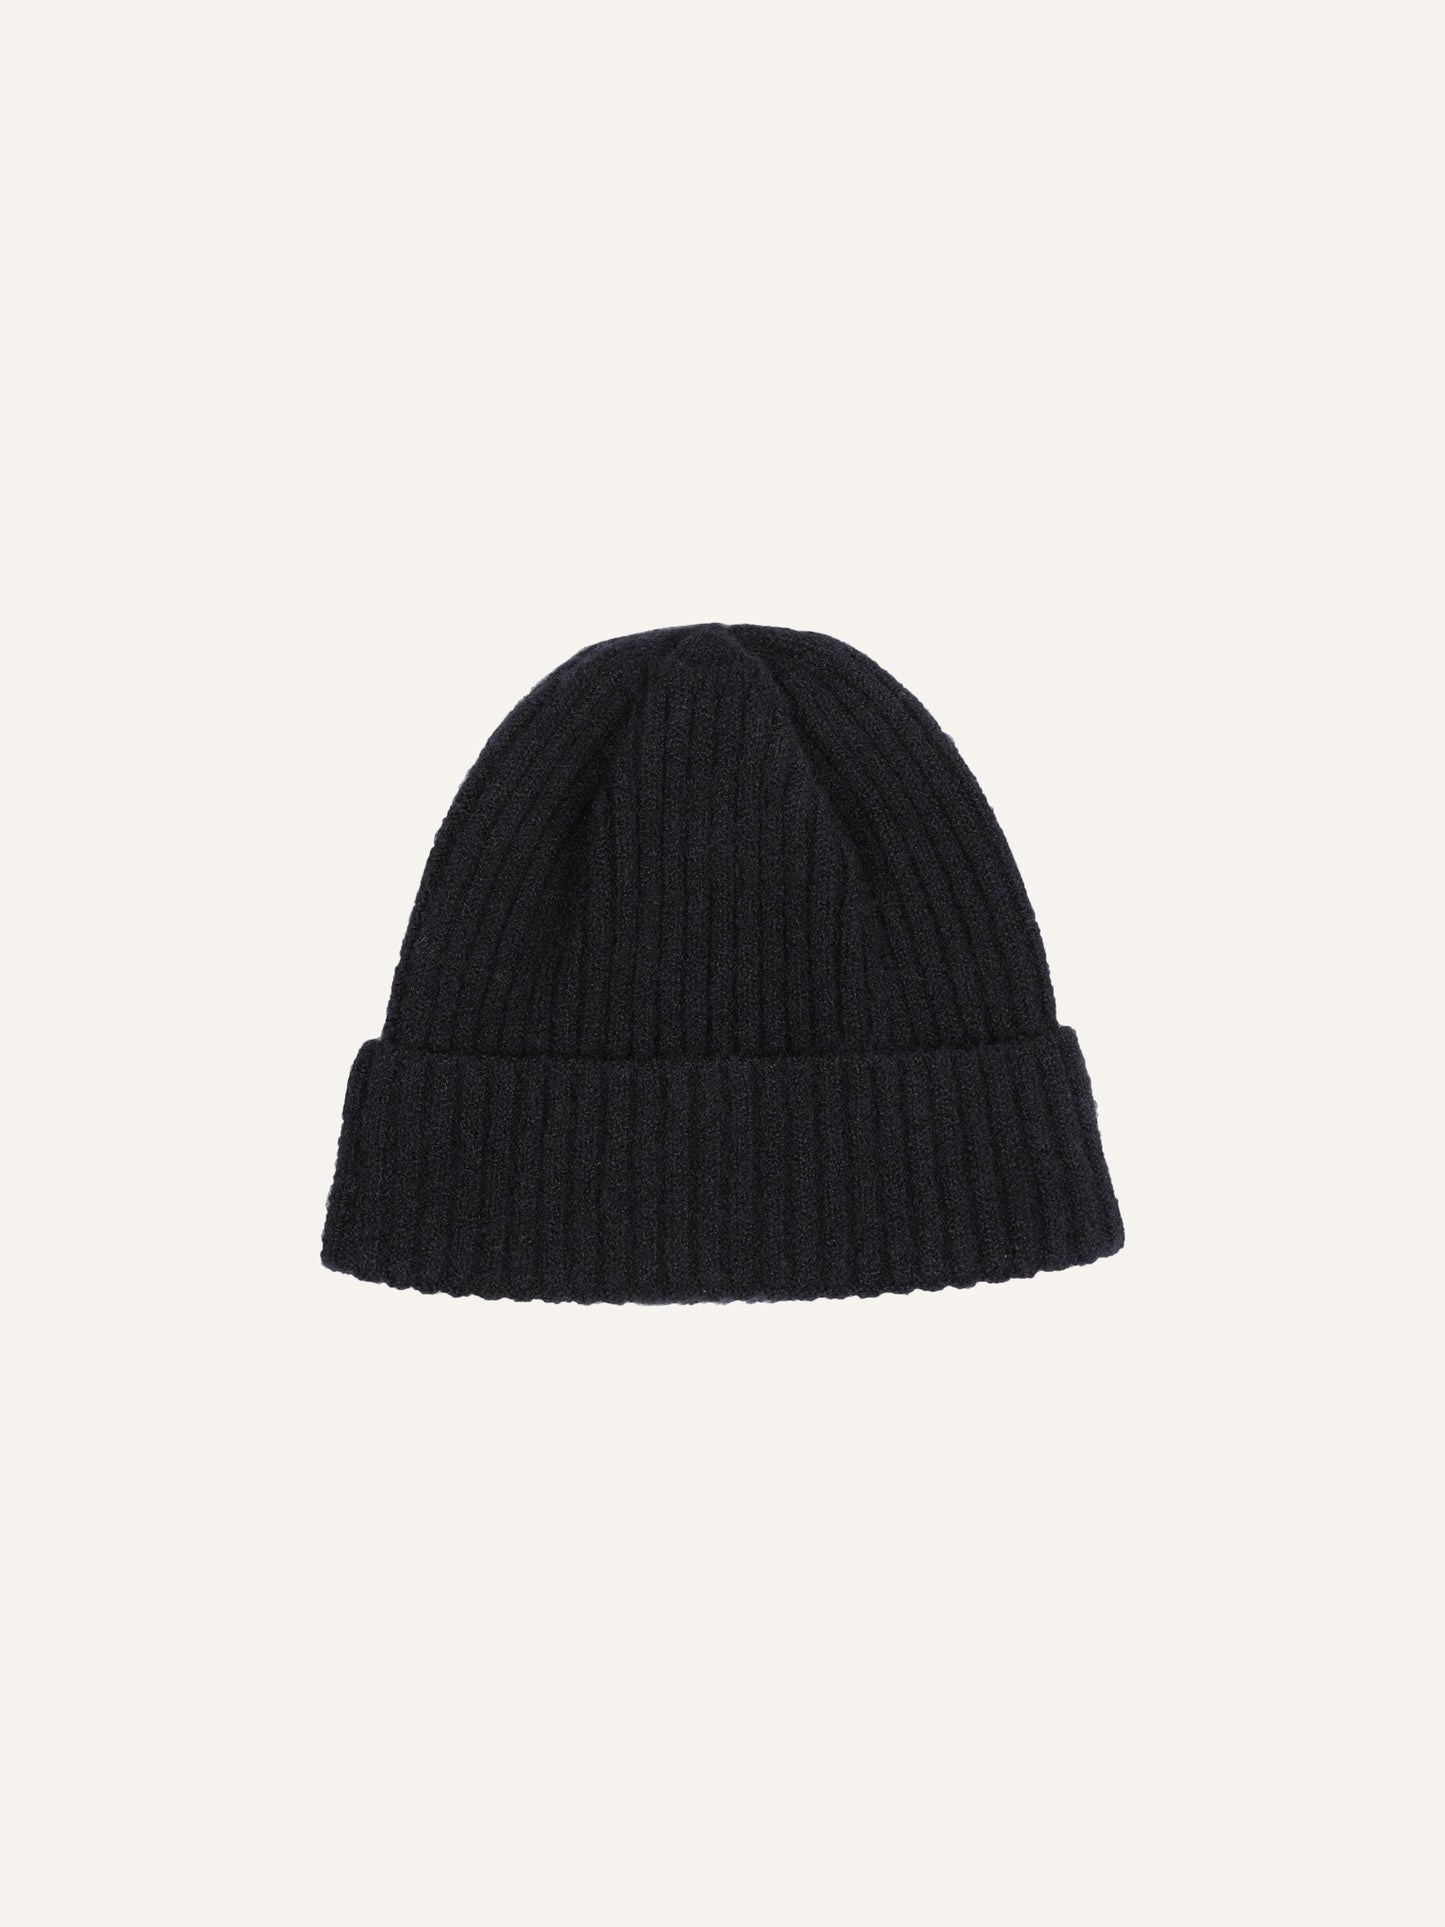 BRUSHED KNITTED BEANIE NAVY BLUE